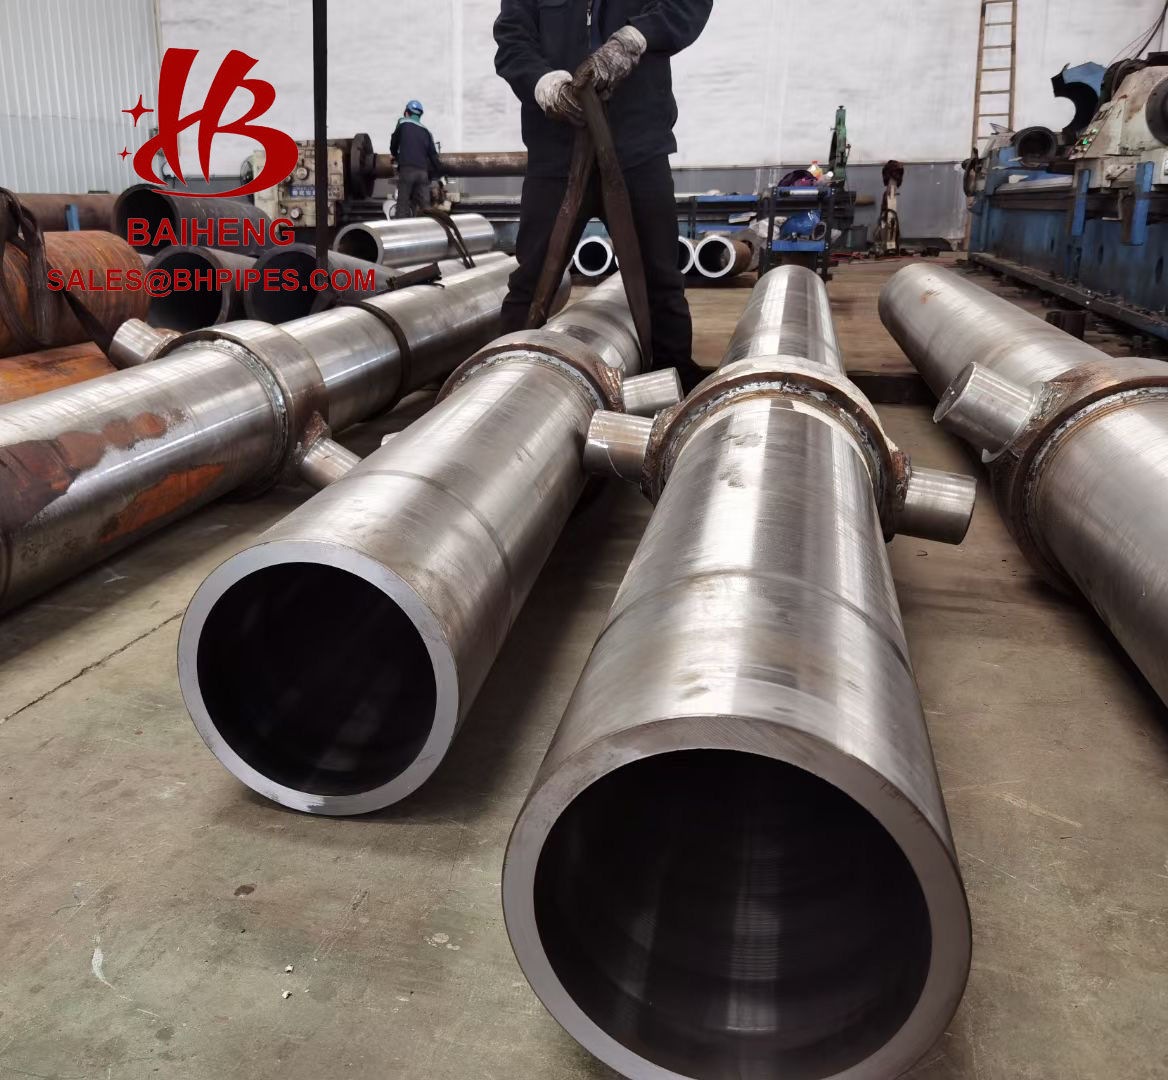 OD 1600mm and ID 1450mm big size honed tubes for cylinders turning and boring tubes honing pipe3